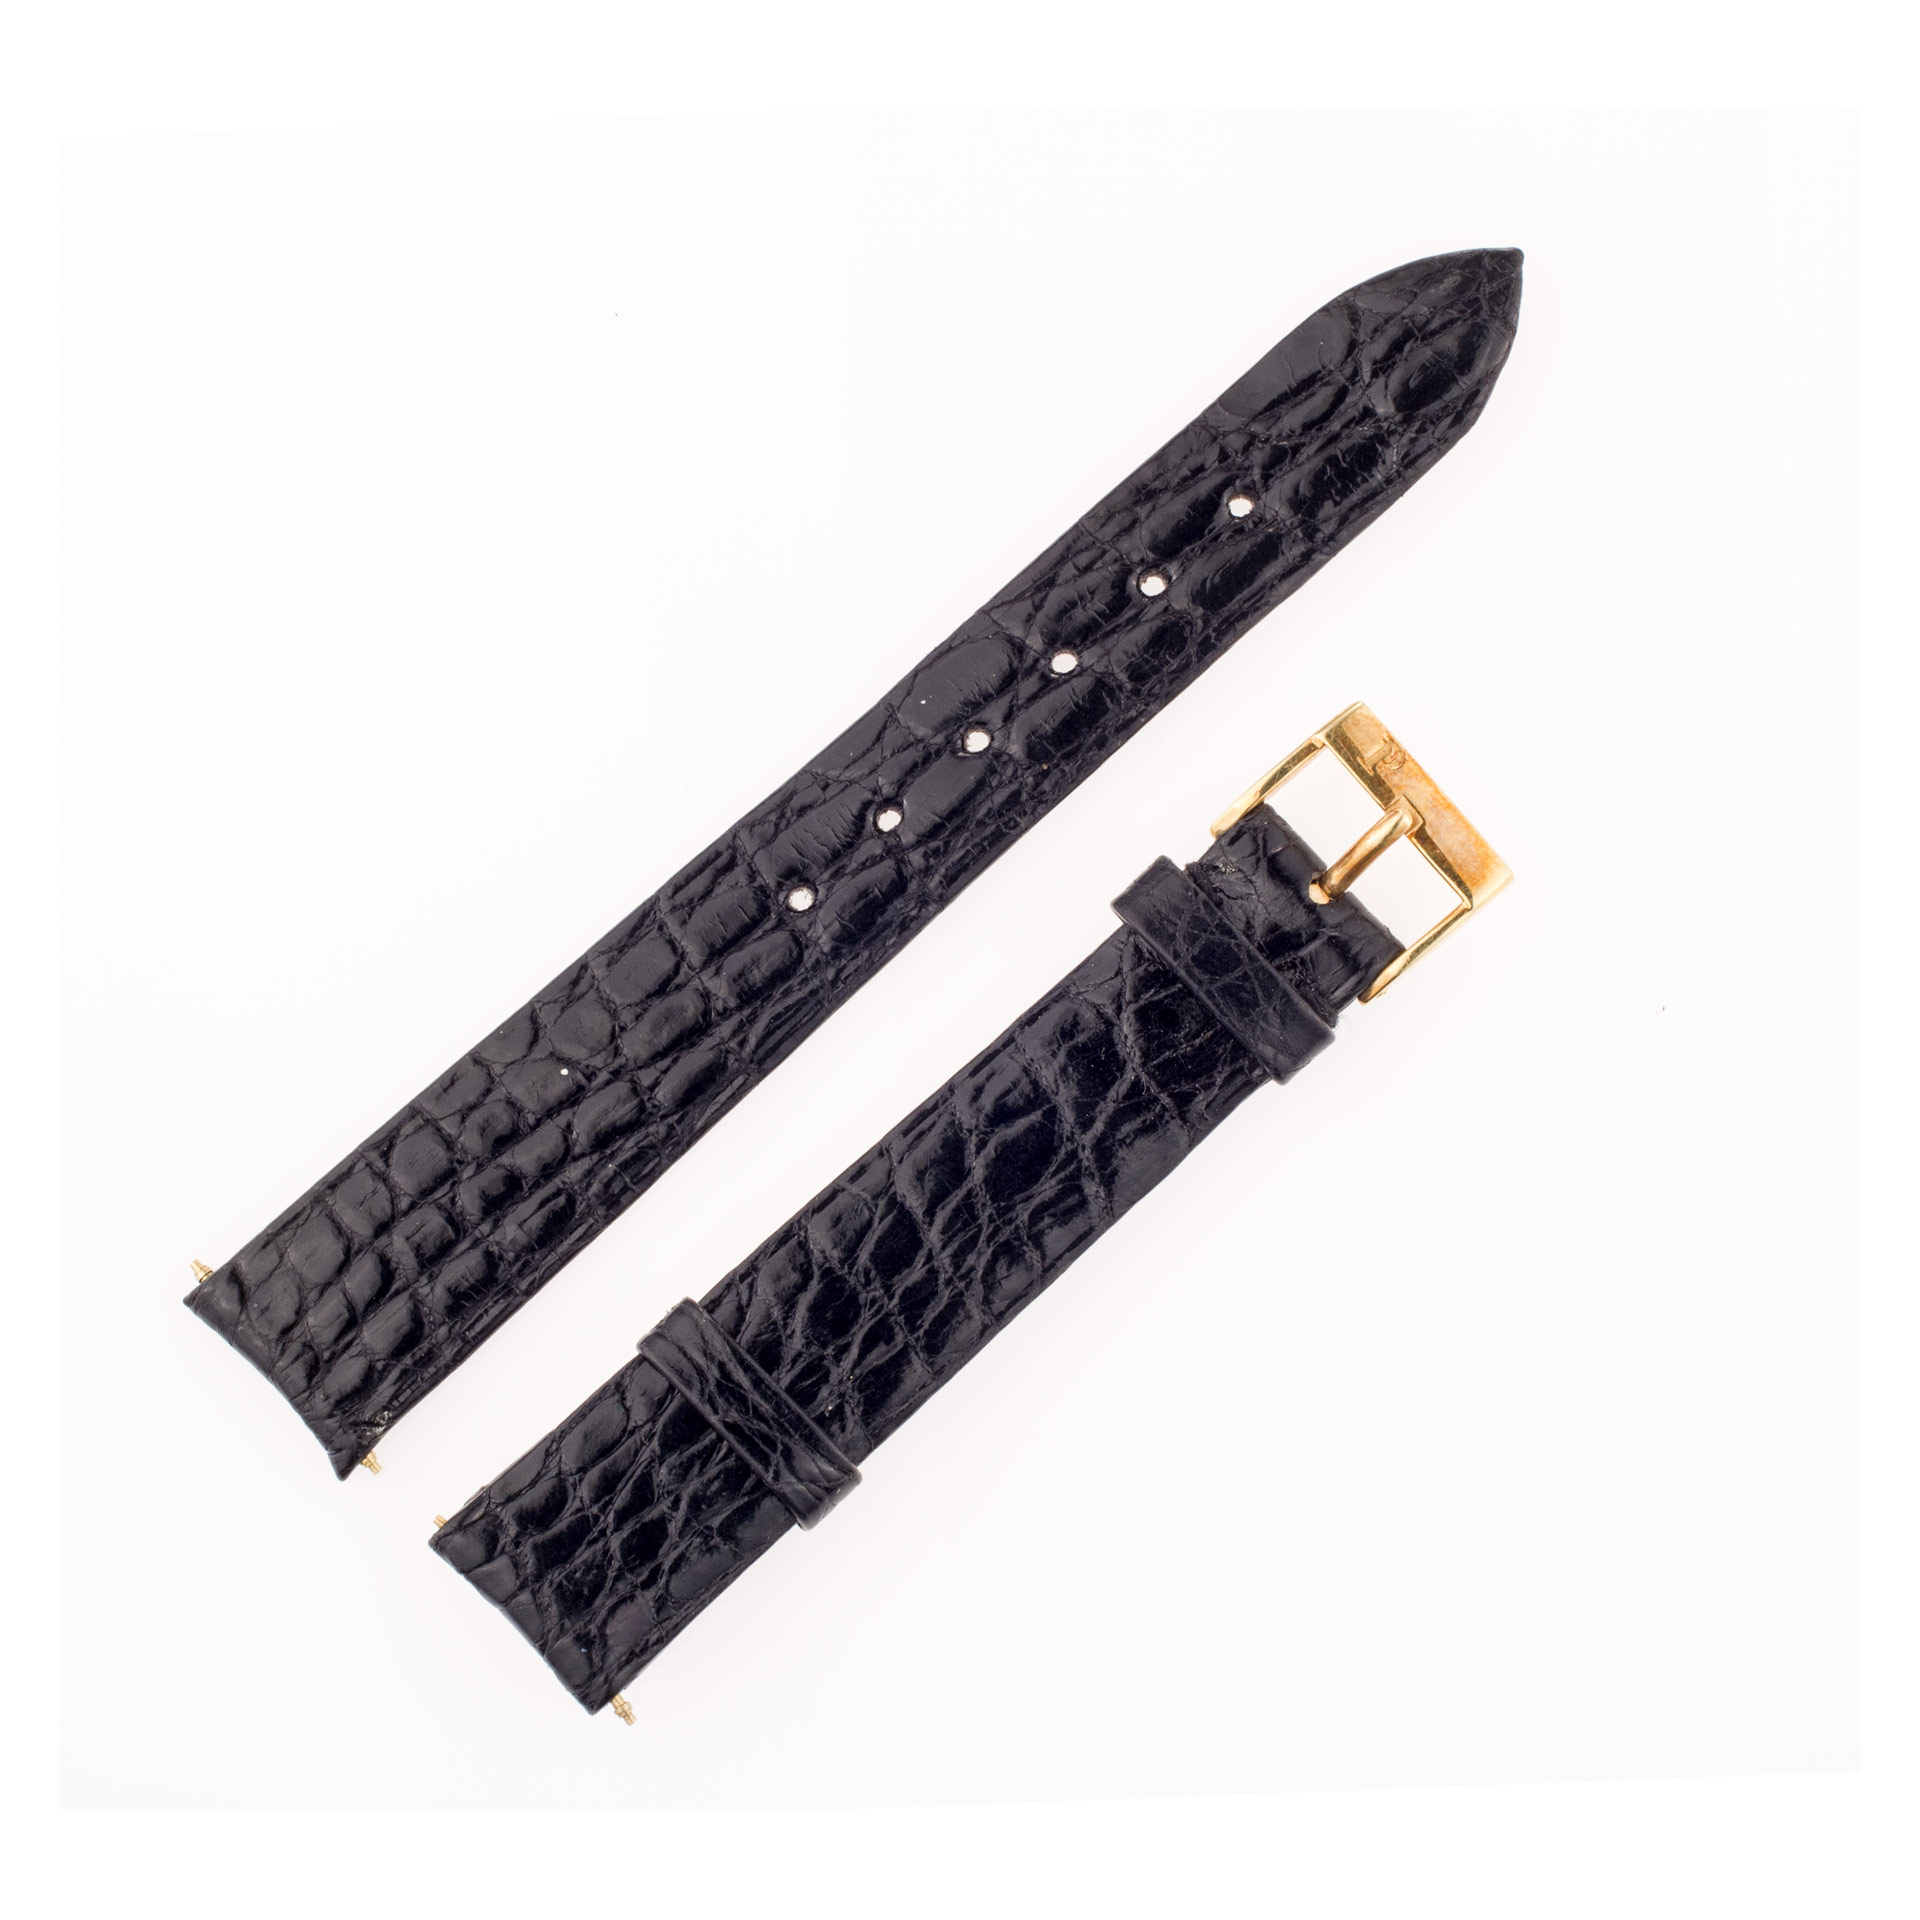 Piaget black croco strap with 18K gold tang (16mm x 14mm)